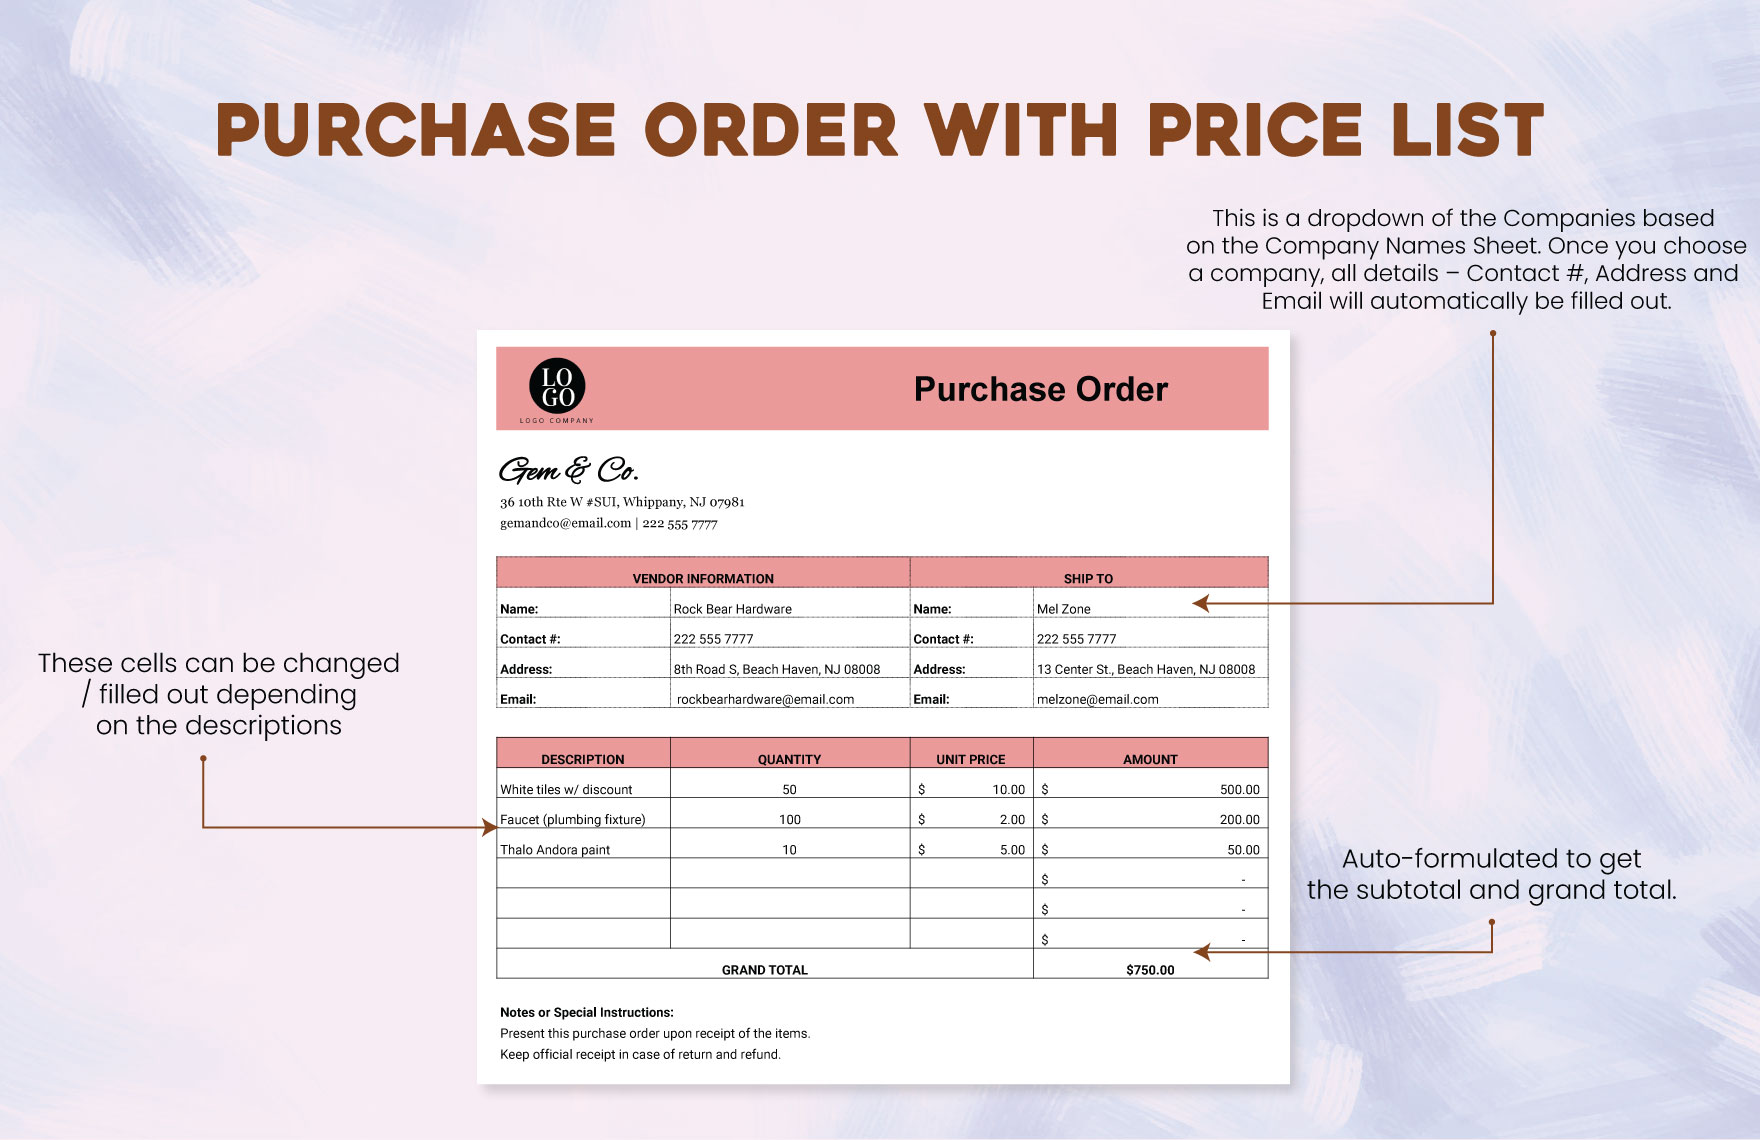 Purchase Order with Price List